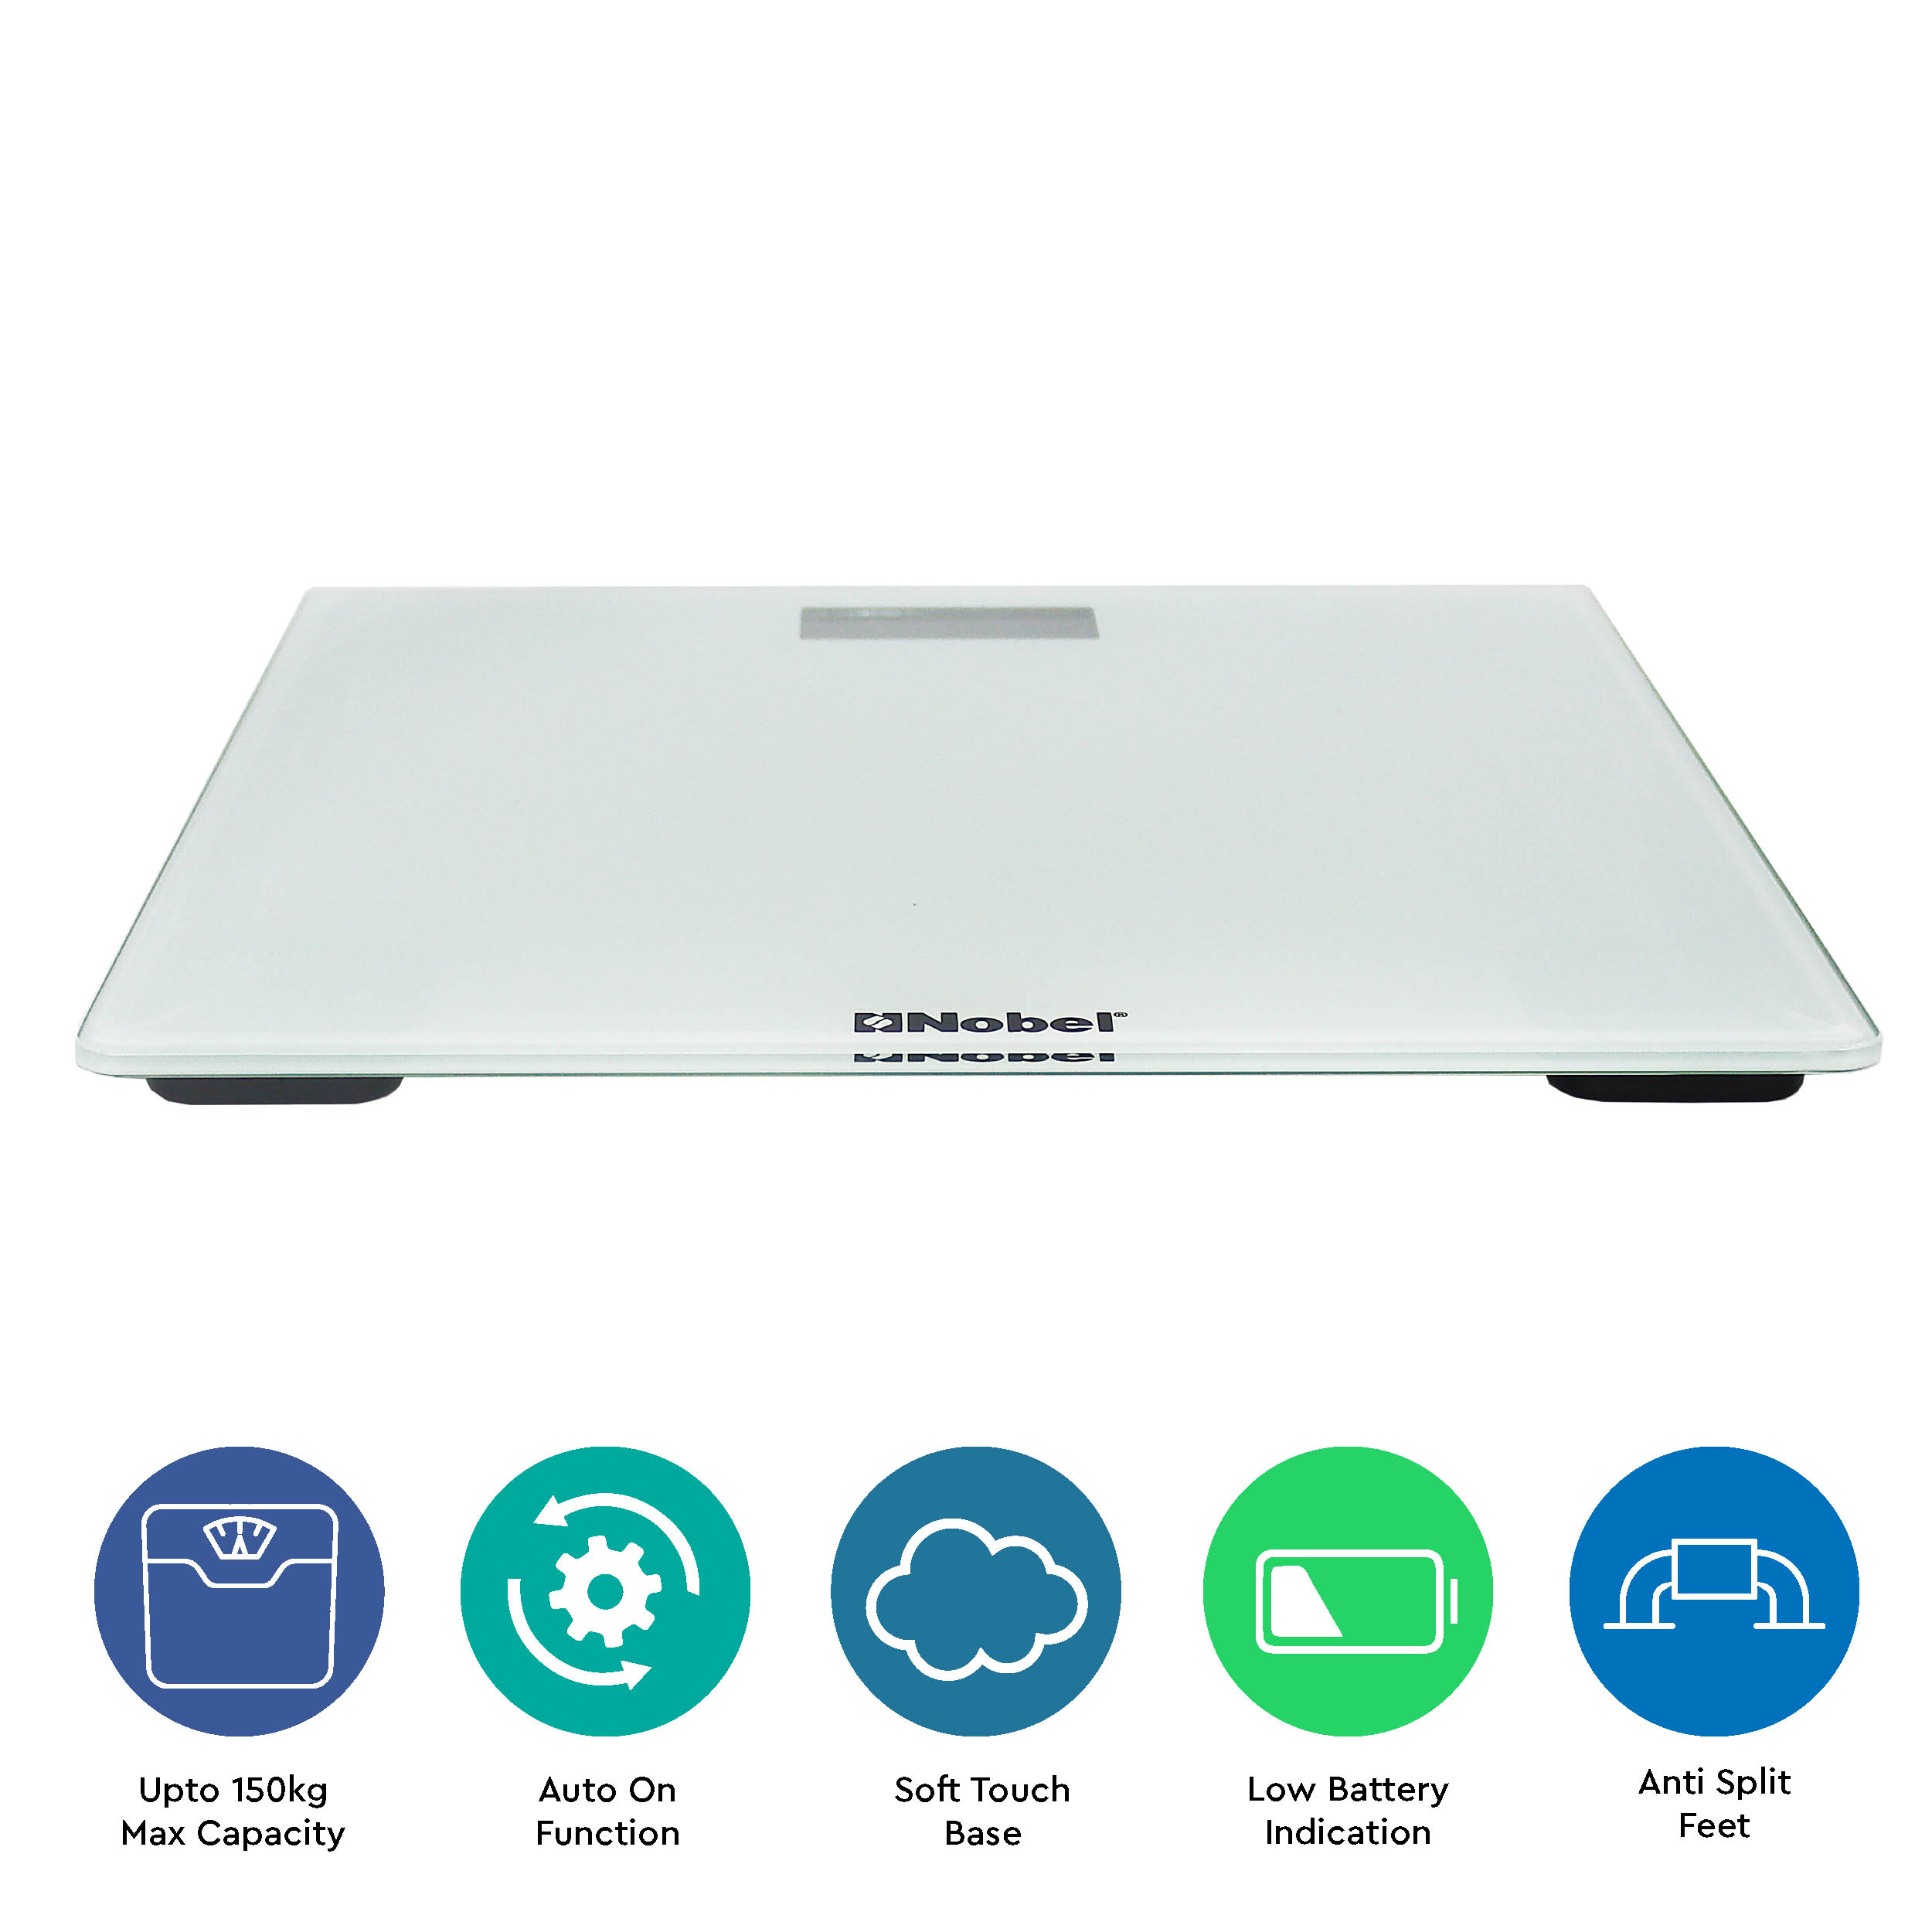 Nobel Weighing Scale 150 Kgs, White - NBS52WH